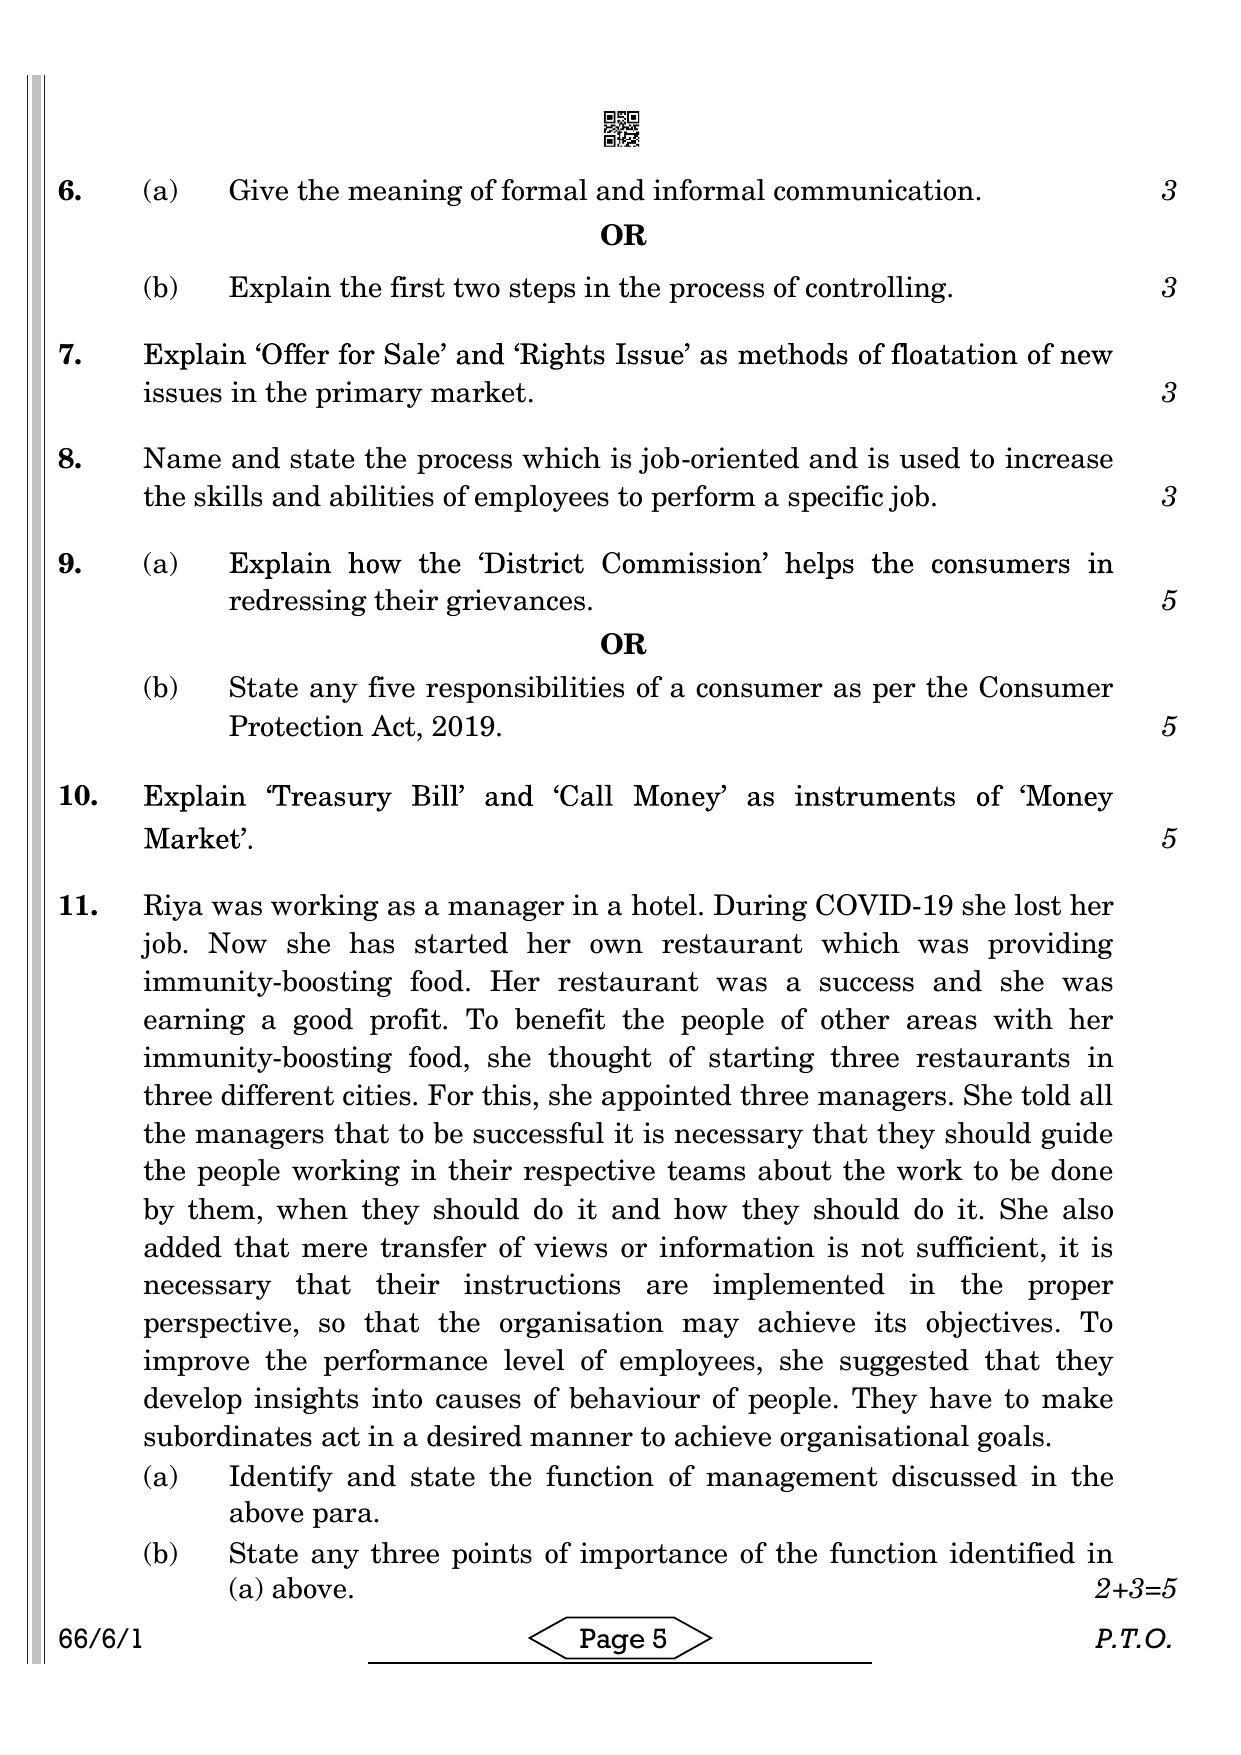 CBSE Class 12 66-6-1 BST 2022 Compartment Question Paper - Page 5